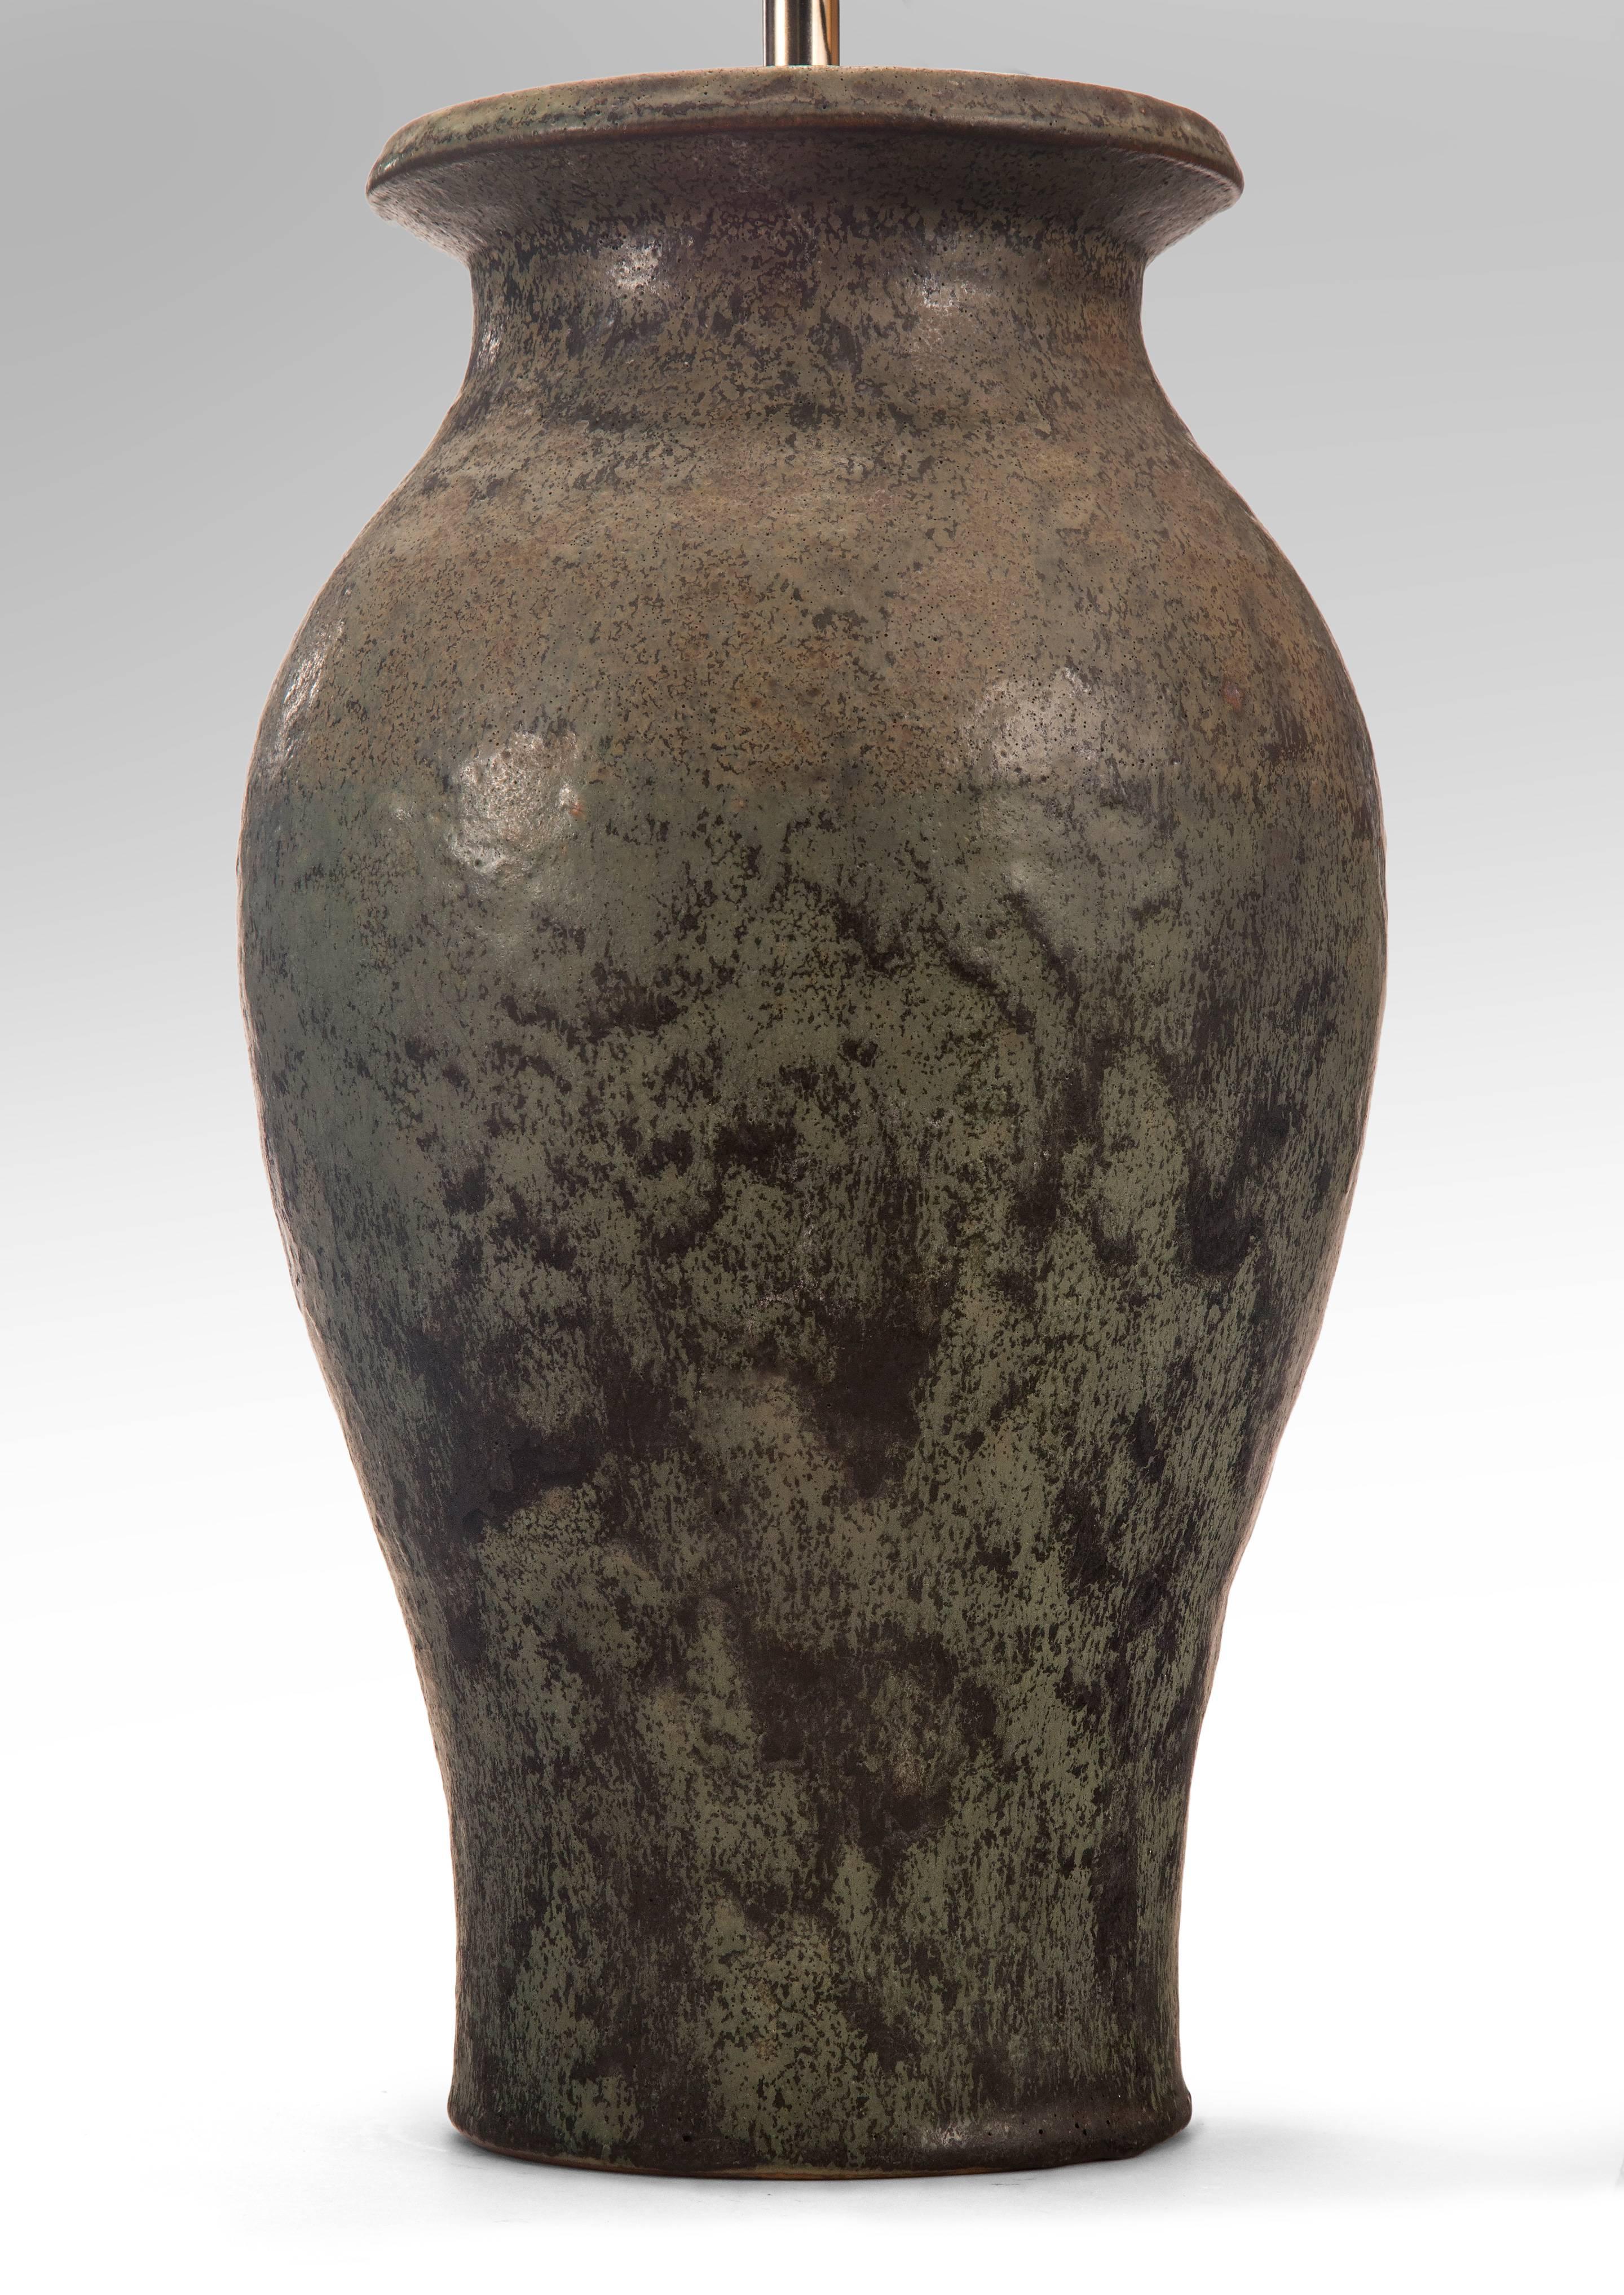 Nice large scale by this leading Danish ceramist. The baluster shaped vase with a subtle and complex variegated glaze of moss green, graphite and light brown.
Signed and dated with Nordstrøm's monogram and ISLE, 1926 2-35